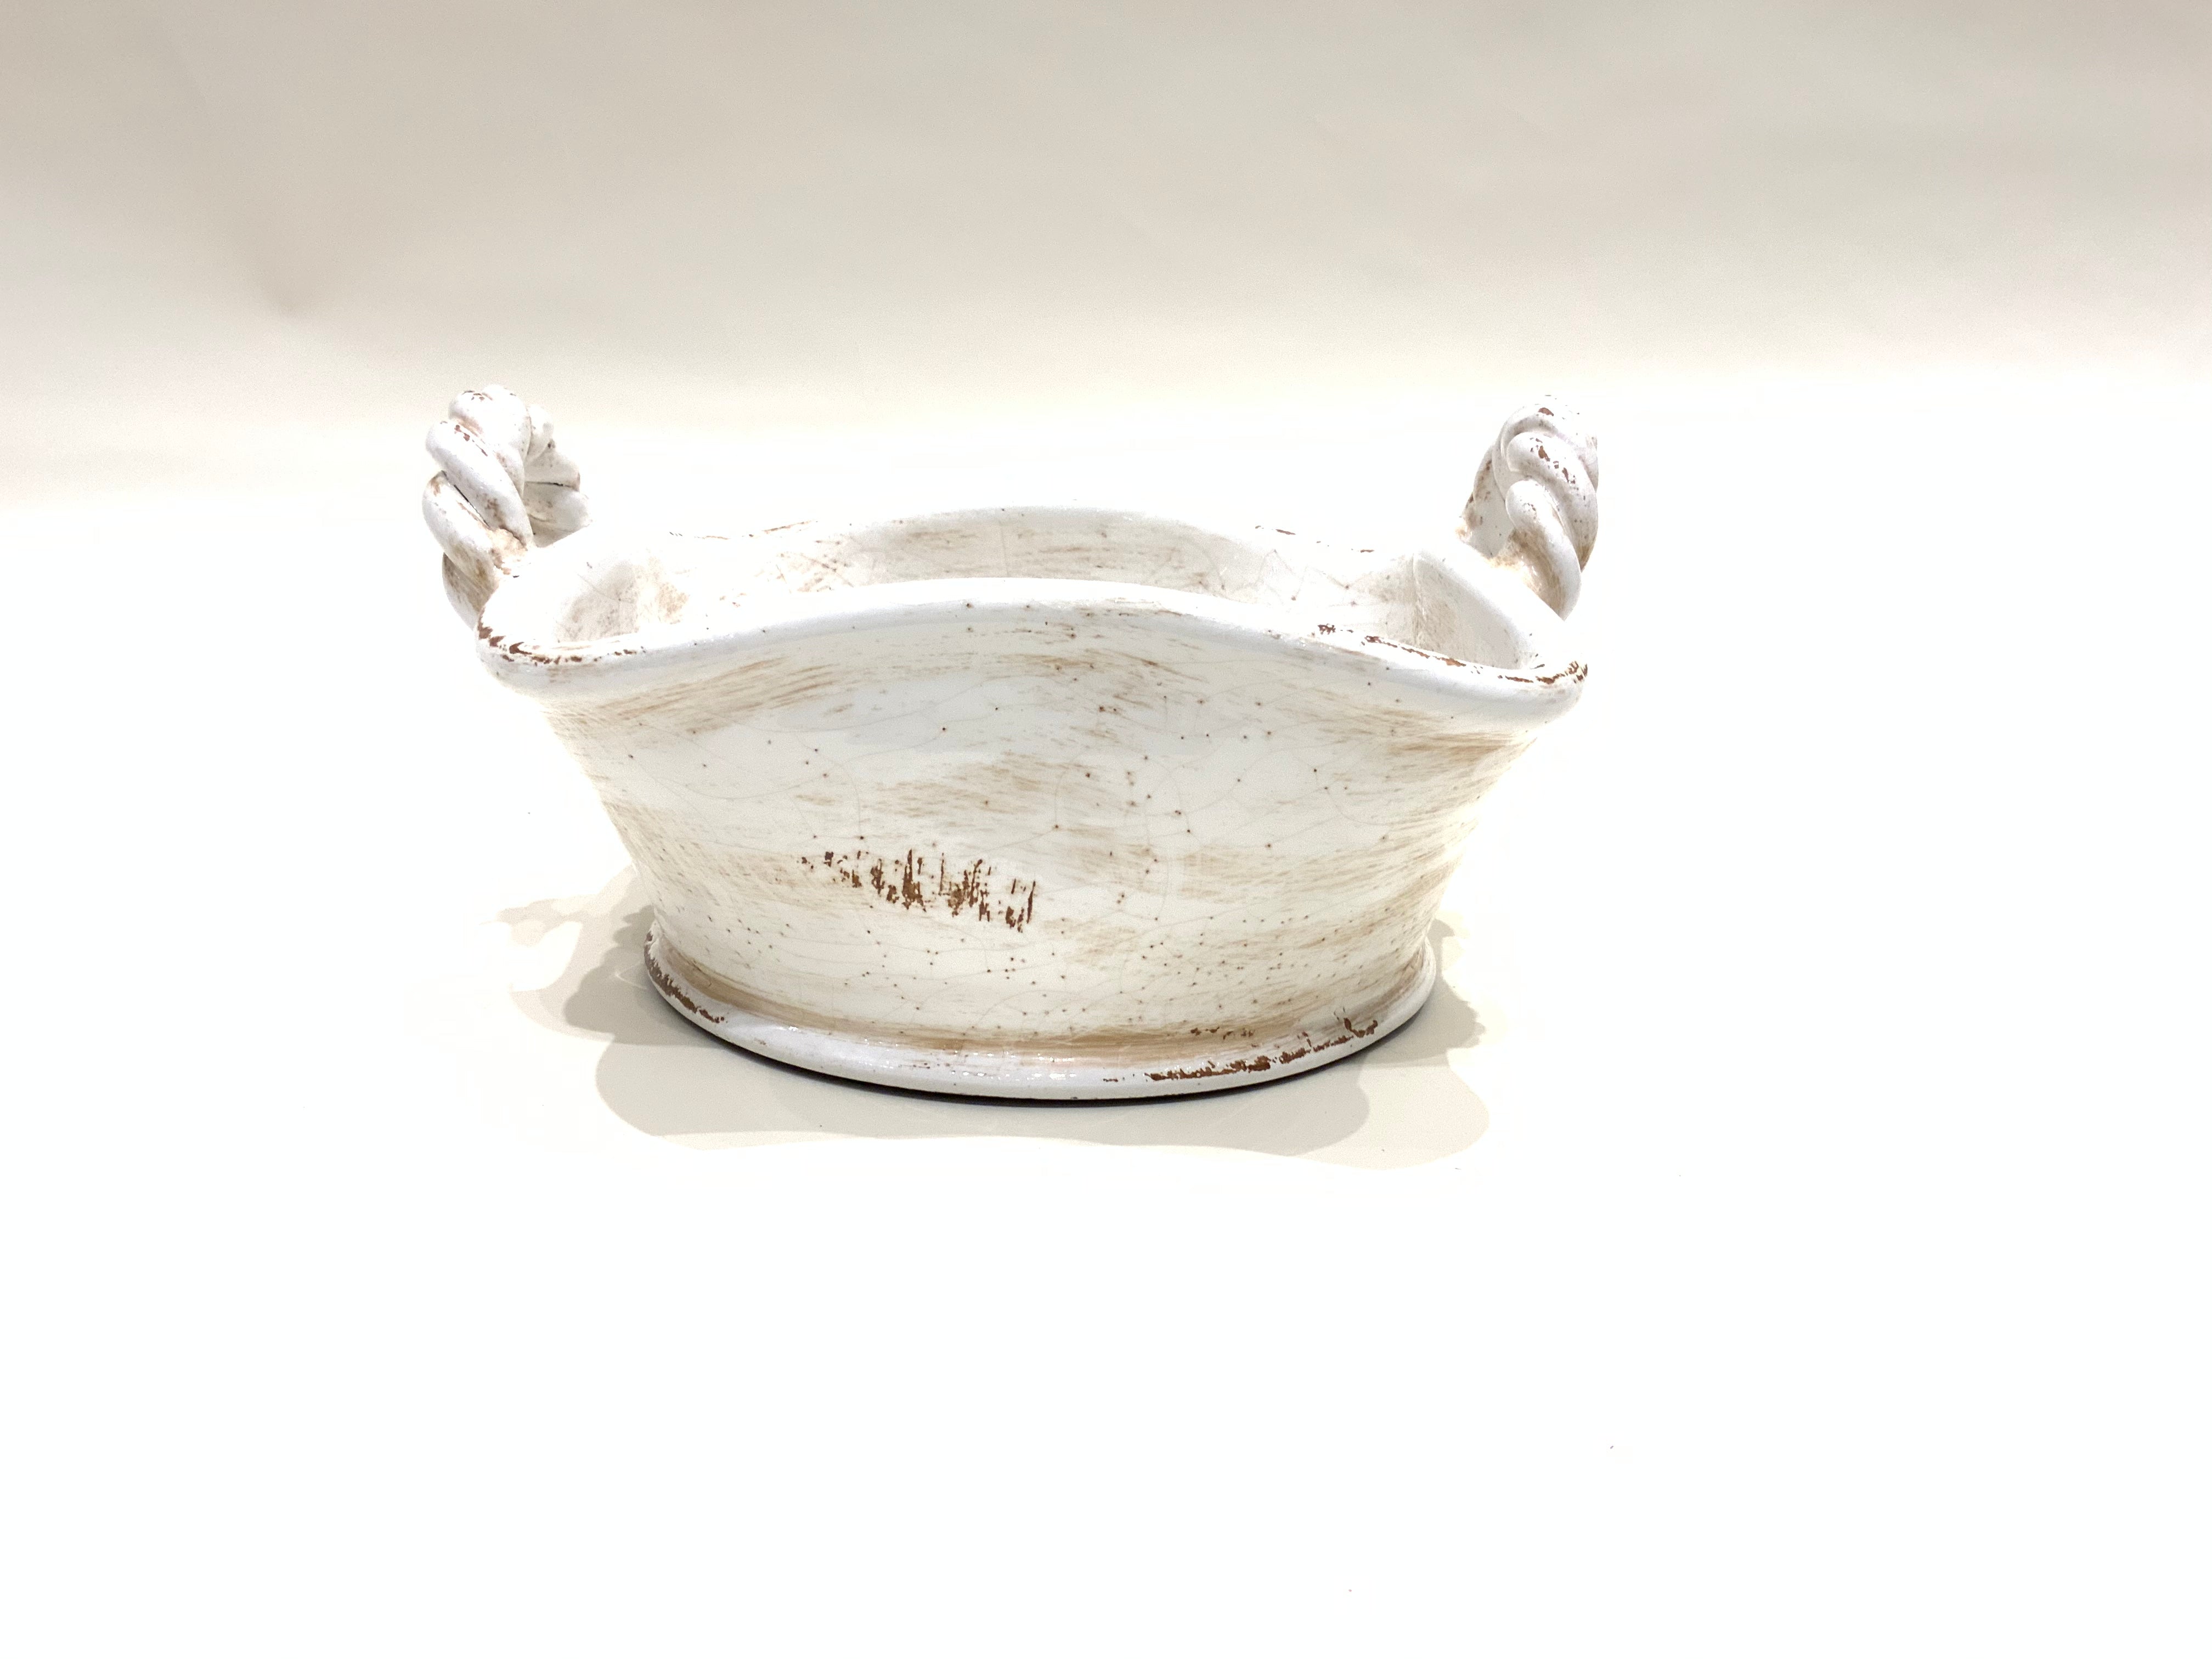 Rustic White Glazed Bowl with Twisted Handles